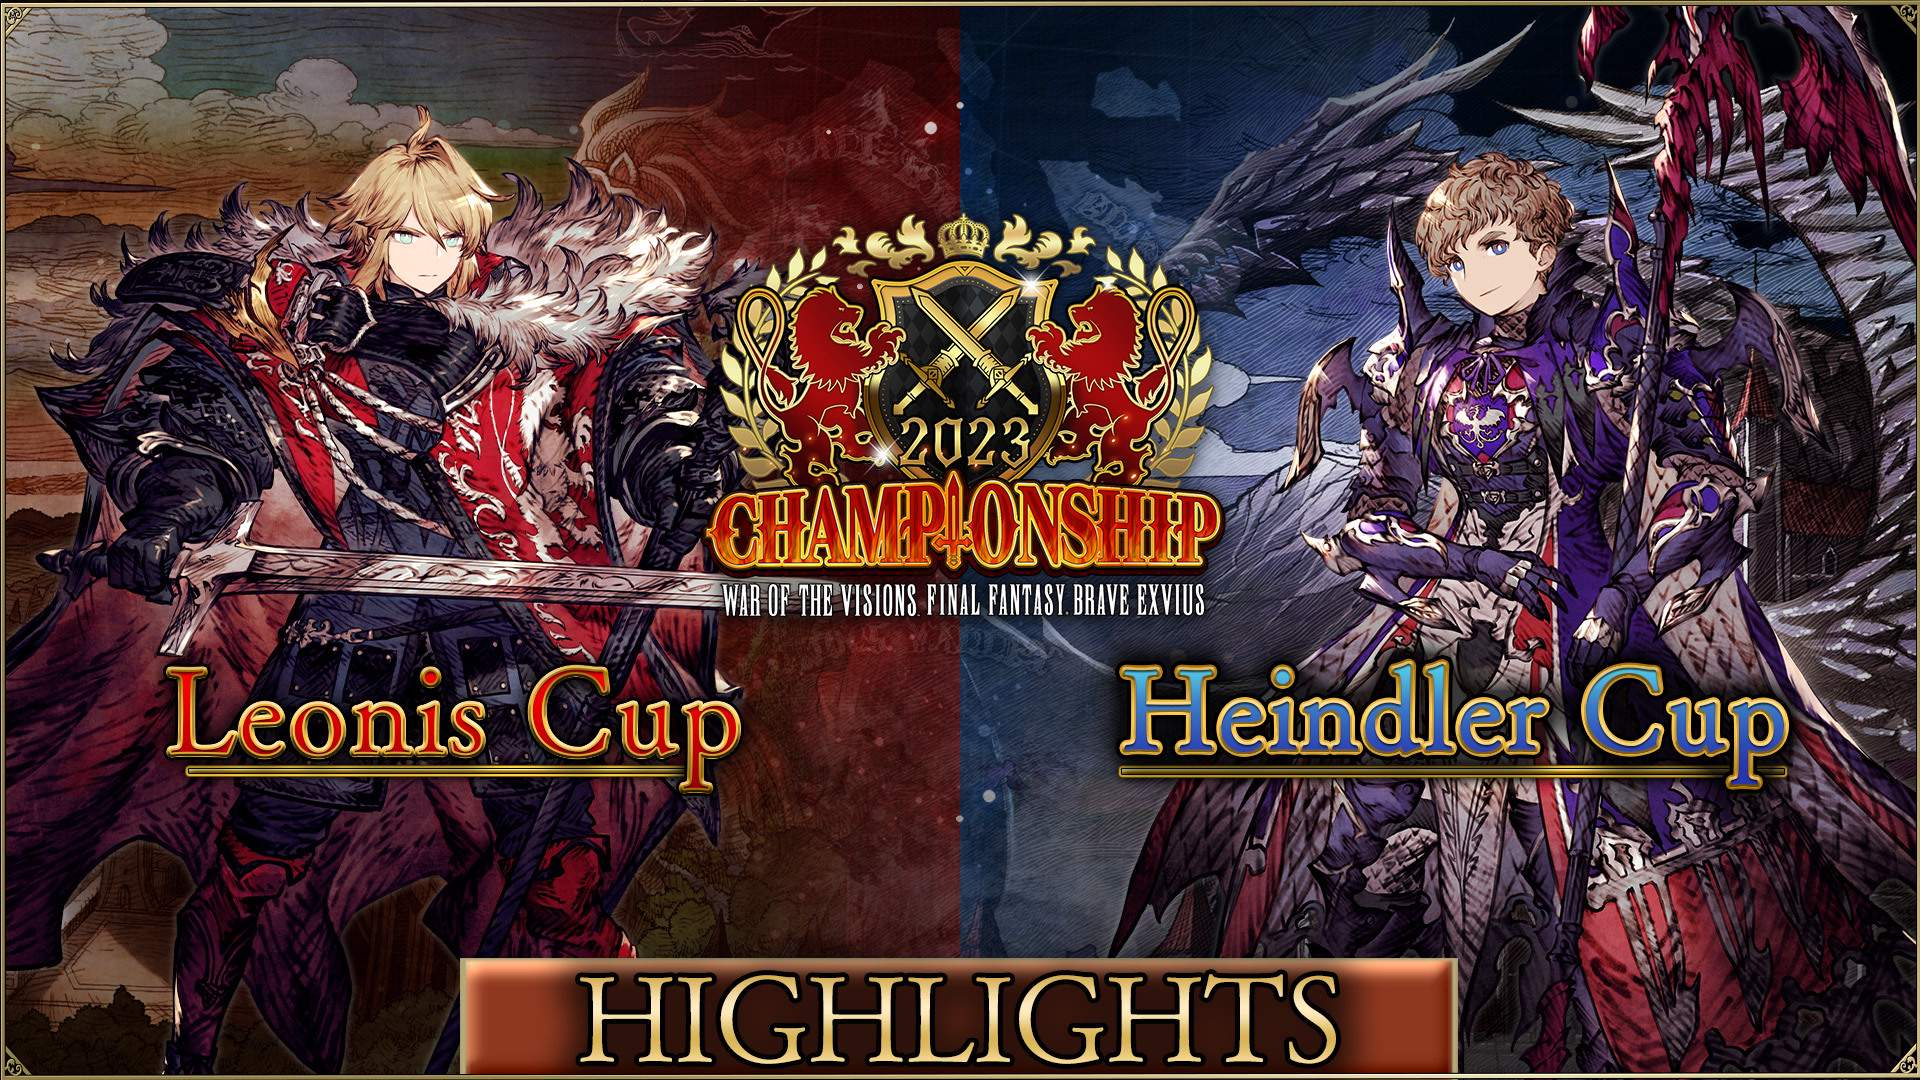 Leonis Cup and Heindler Cup Highlights for the WOTV FFBE Championship 2023